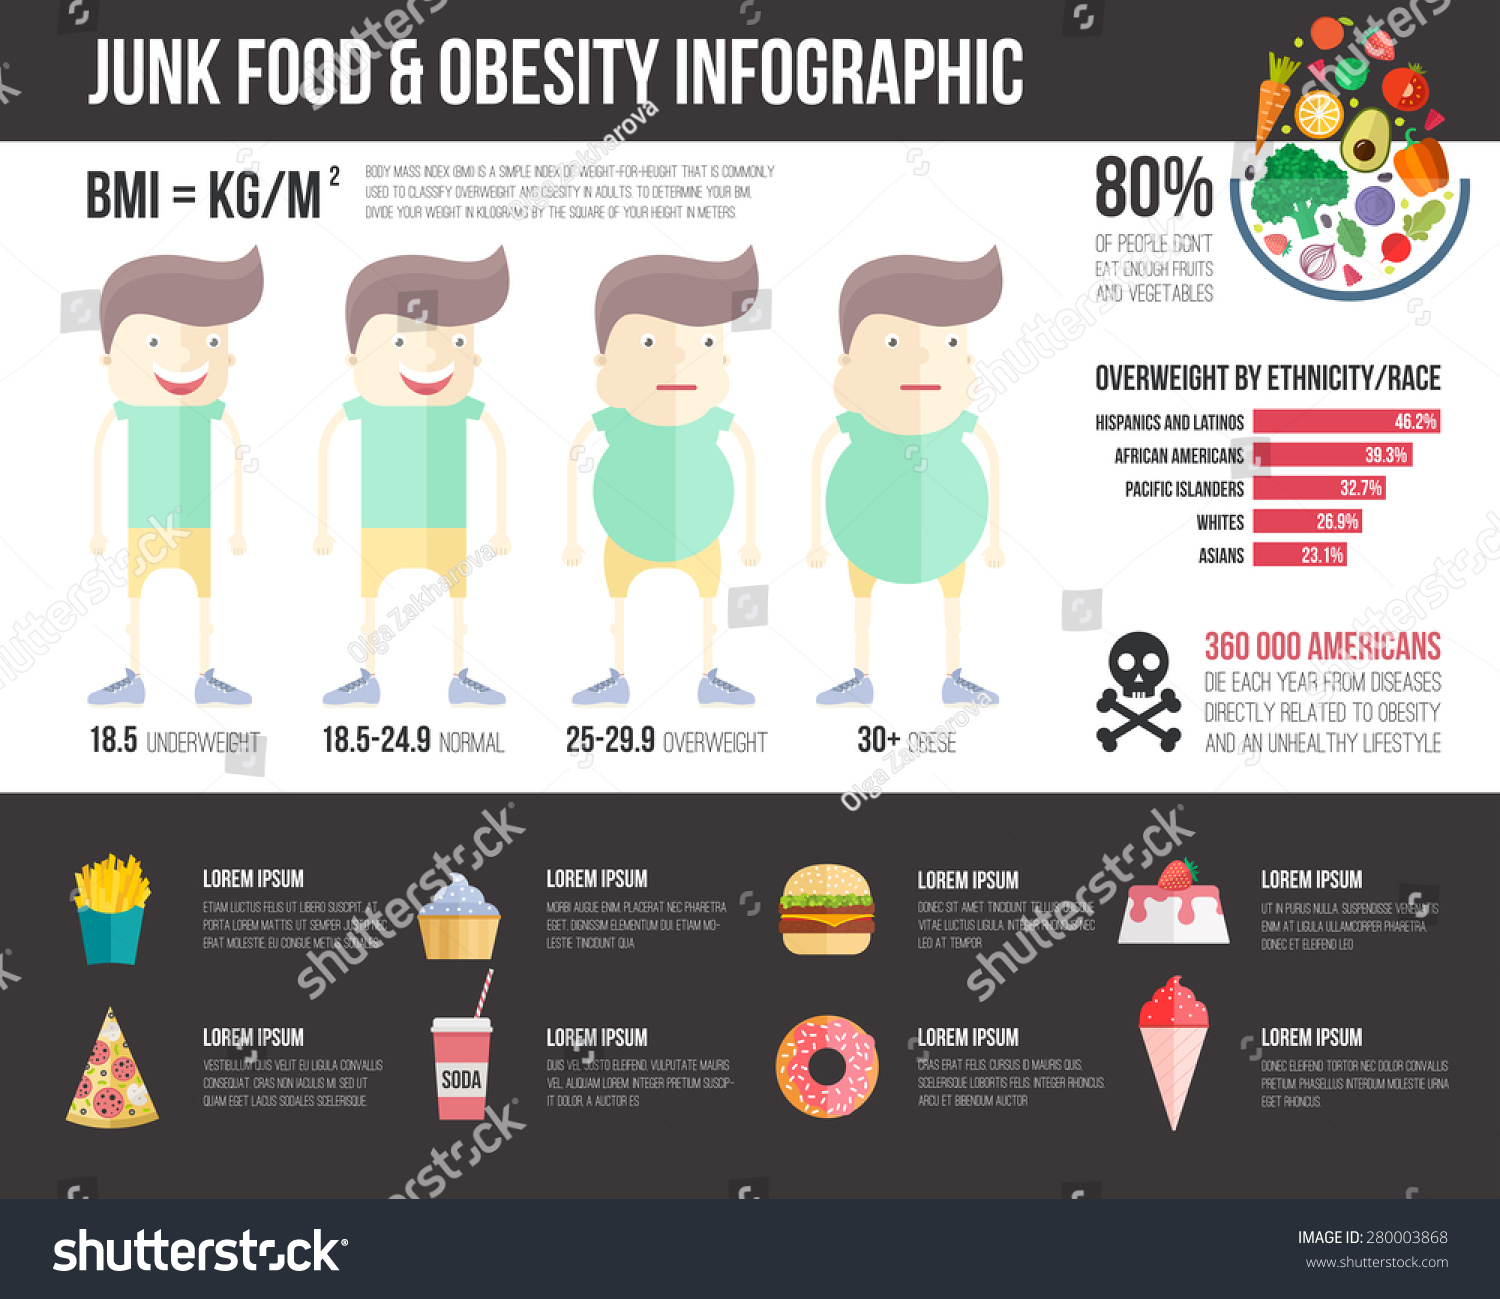 Obesity Infographic Template Fast Food Healthy Habits And Other Overweight Statistic In 